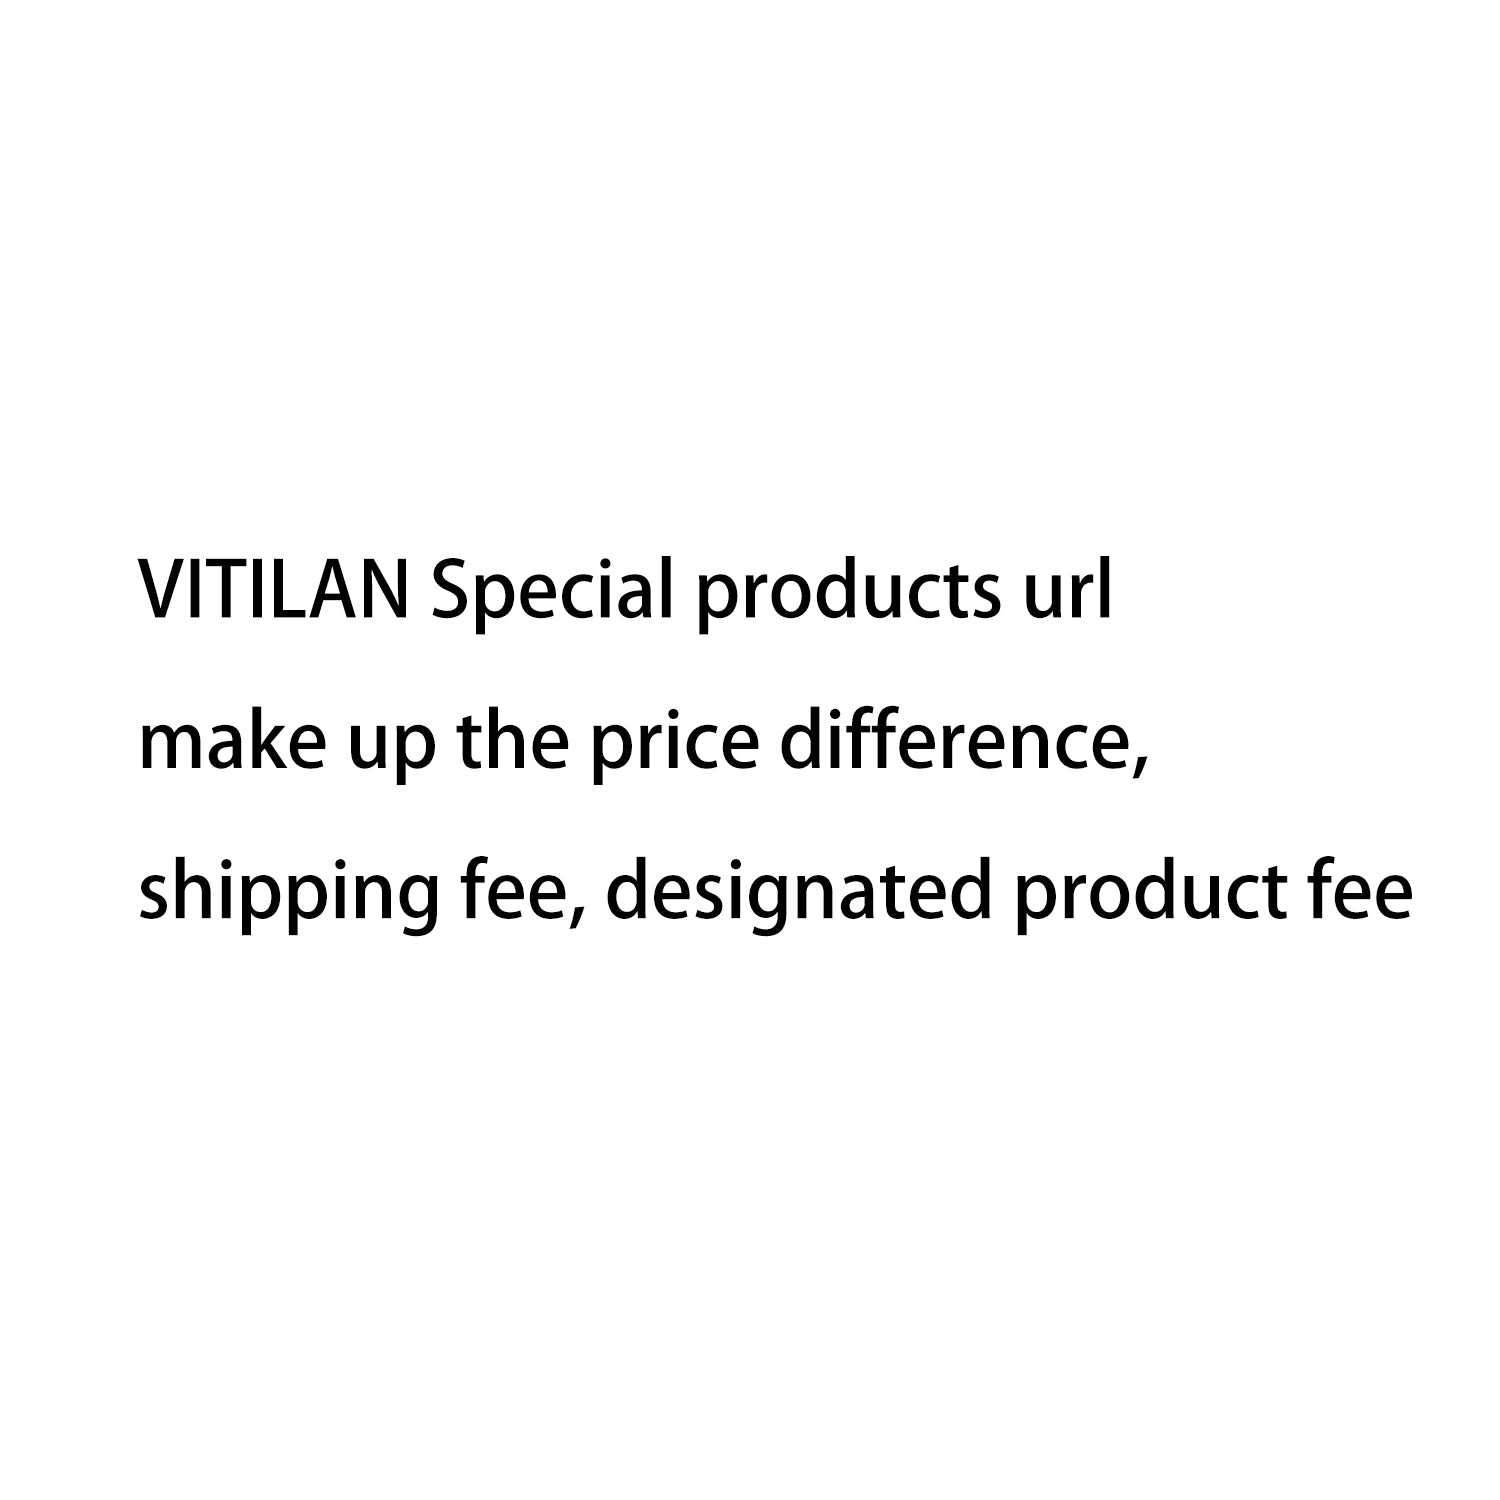 VITILAN Special products url - make up the price difference, shipping fee, designated product fee